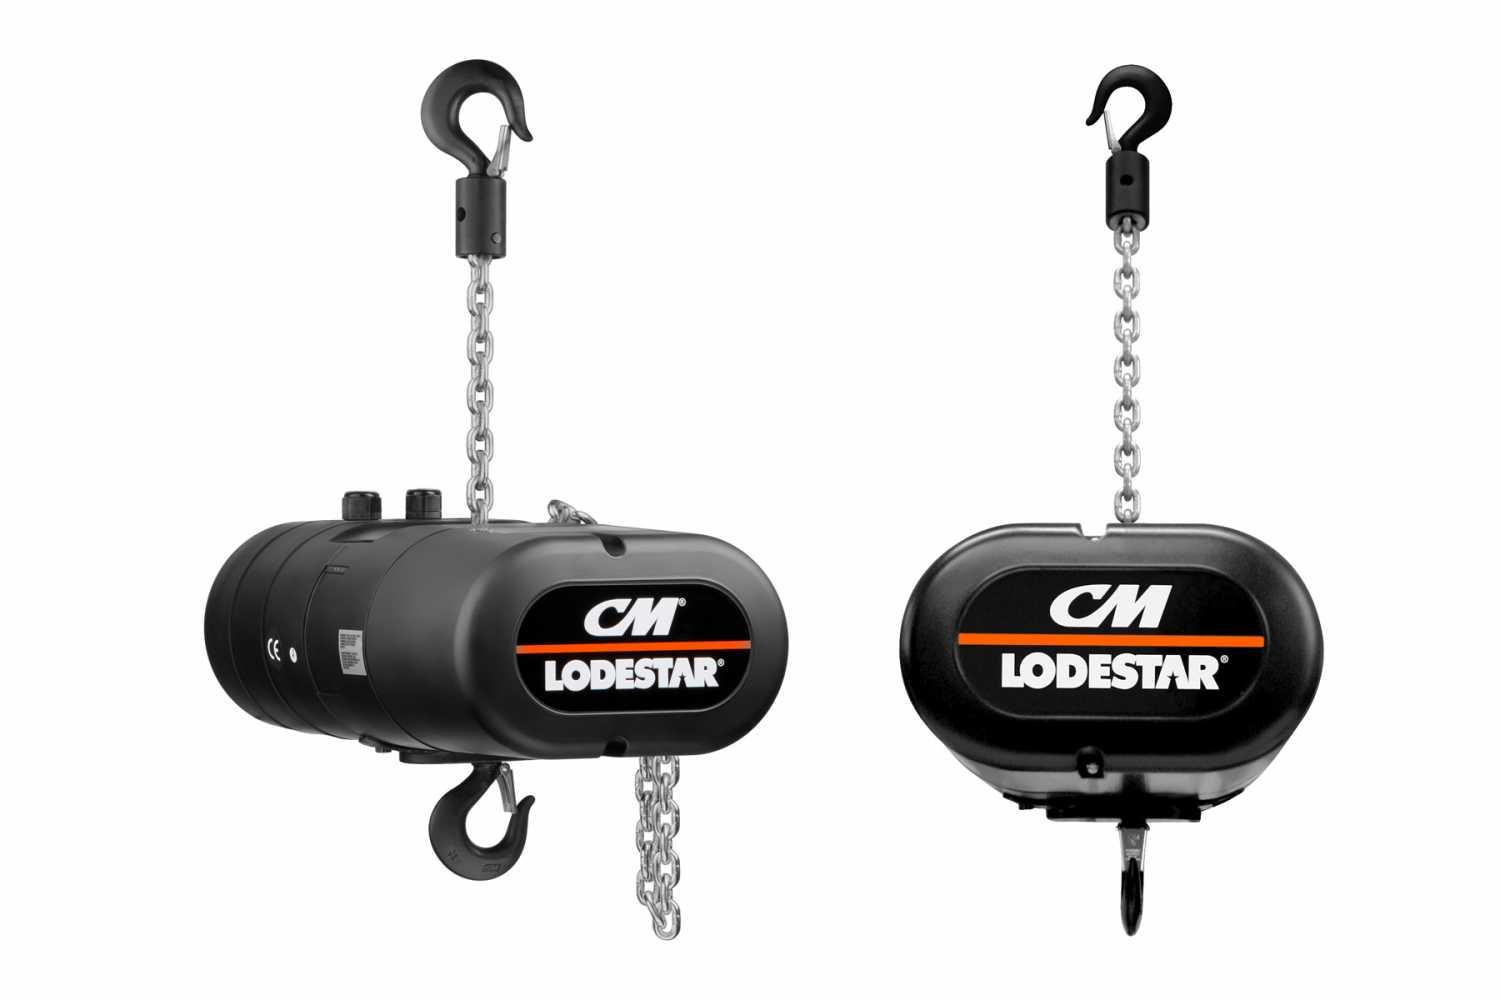 Extreme Rigging has announced the purchase from AC-ET of a number of new line 0.5-ton CM Lodestar D8 hoists